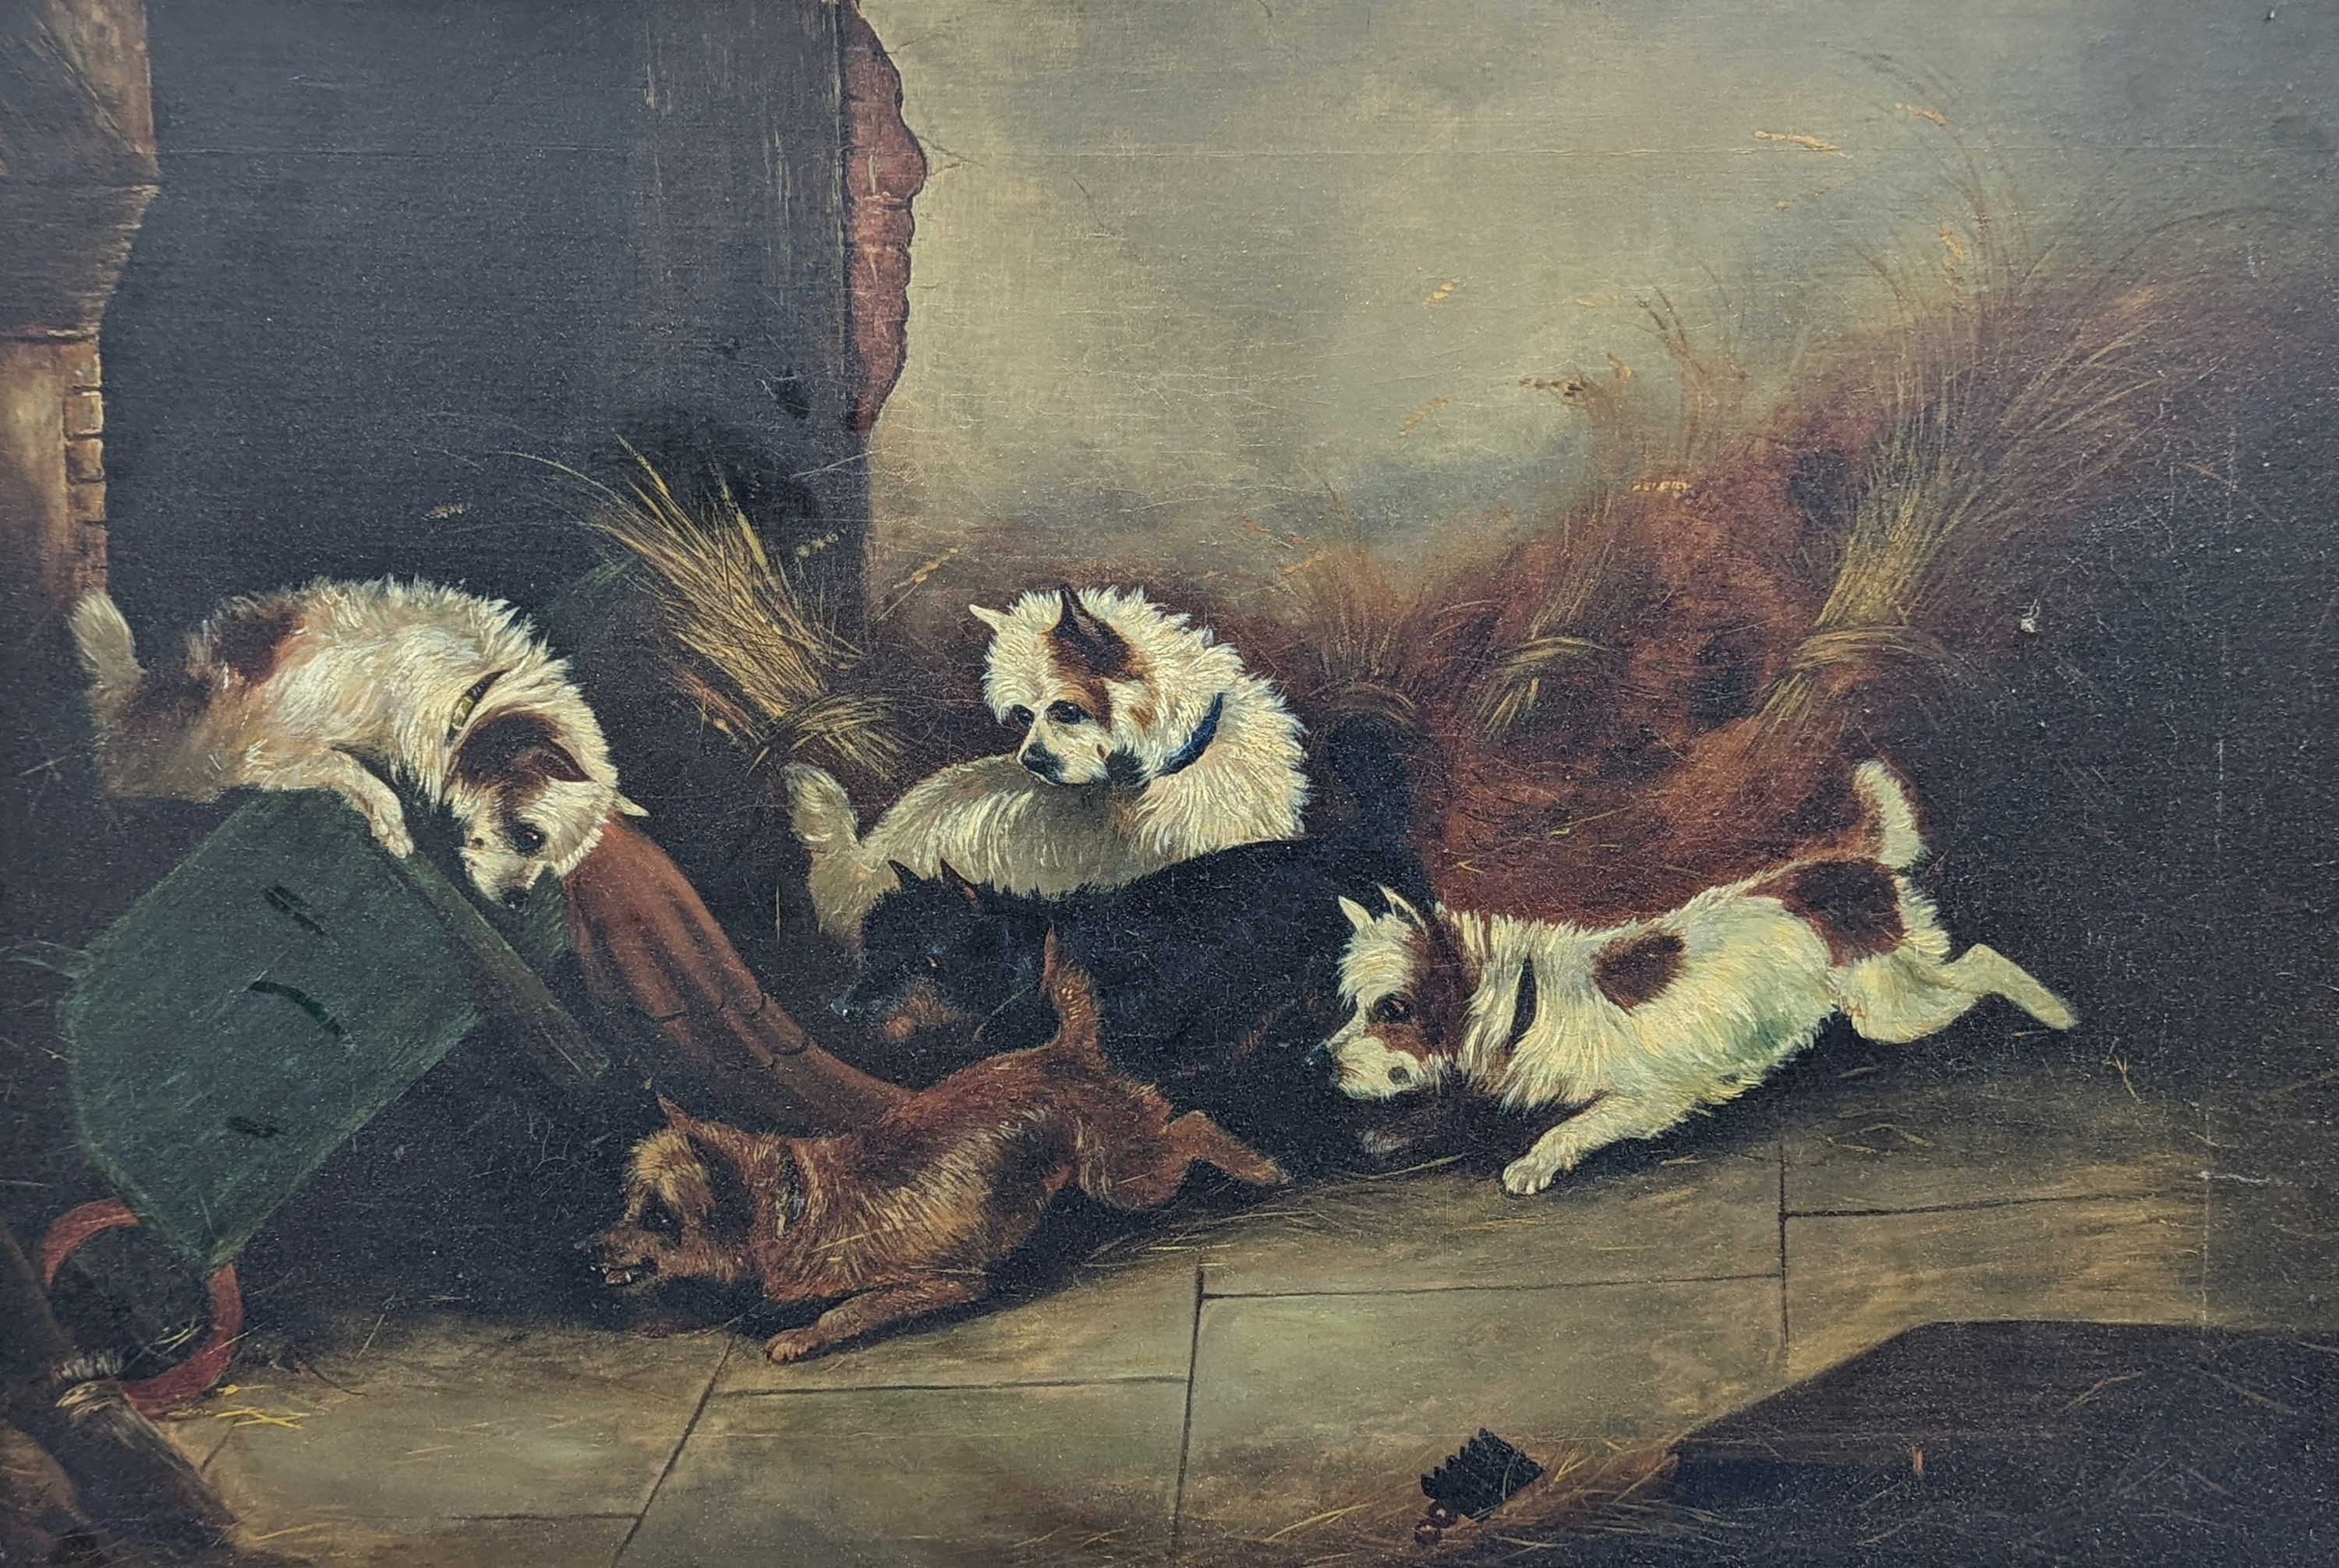 After Armfield, oil on canvas, Terriers ratting in a barn, 50 x 75cm